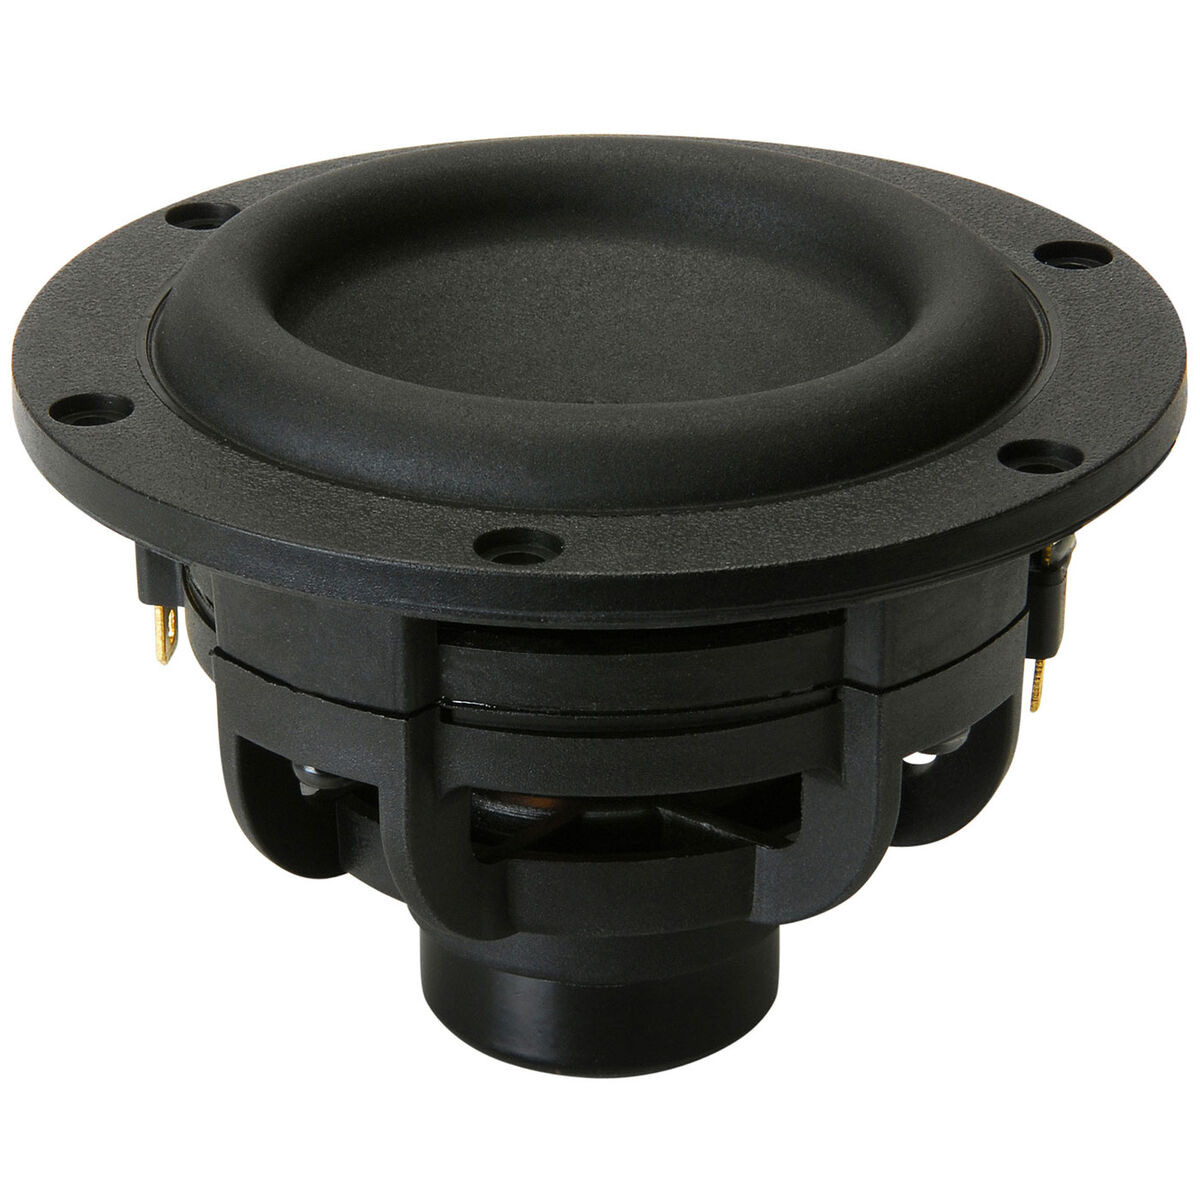 Globus Pris Tomhed Tang Band W3-1876S 3" Mini Subwoofer